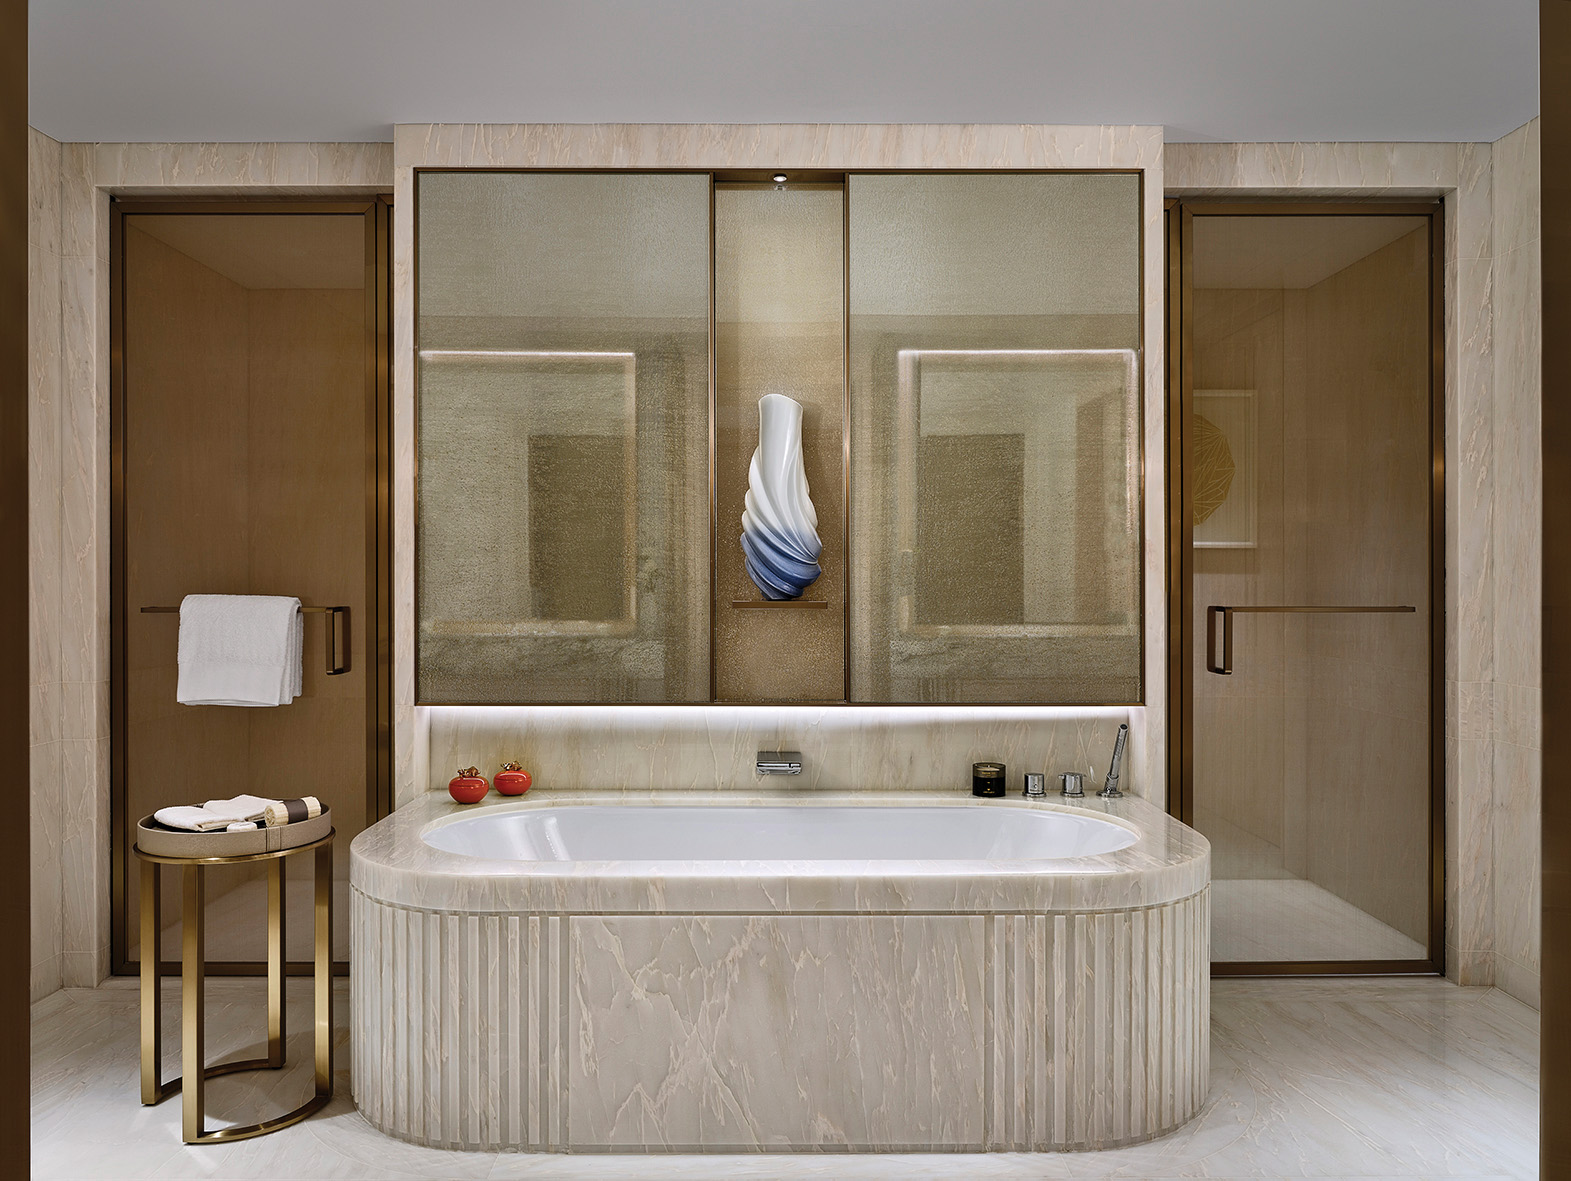 Marina Bay Sands Sets the Bar Higher with Newly Revamped Rooms and ...